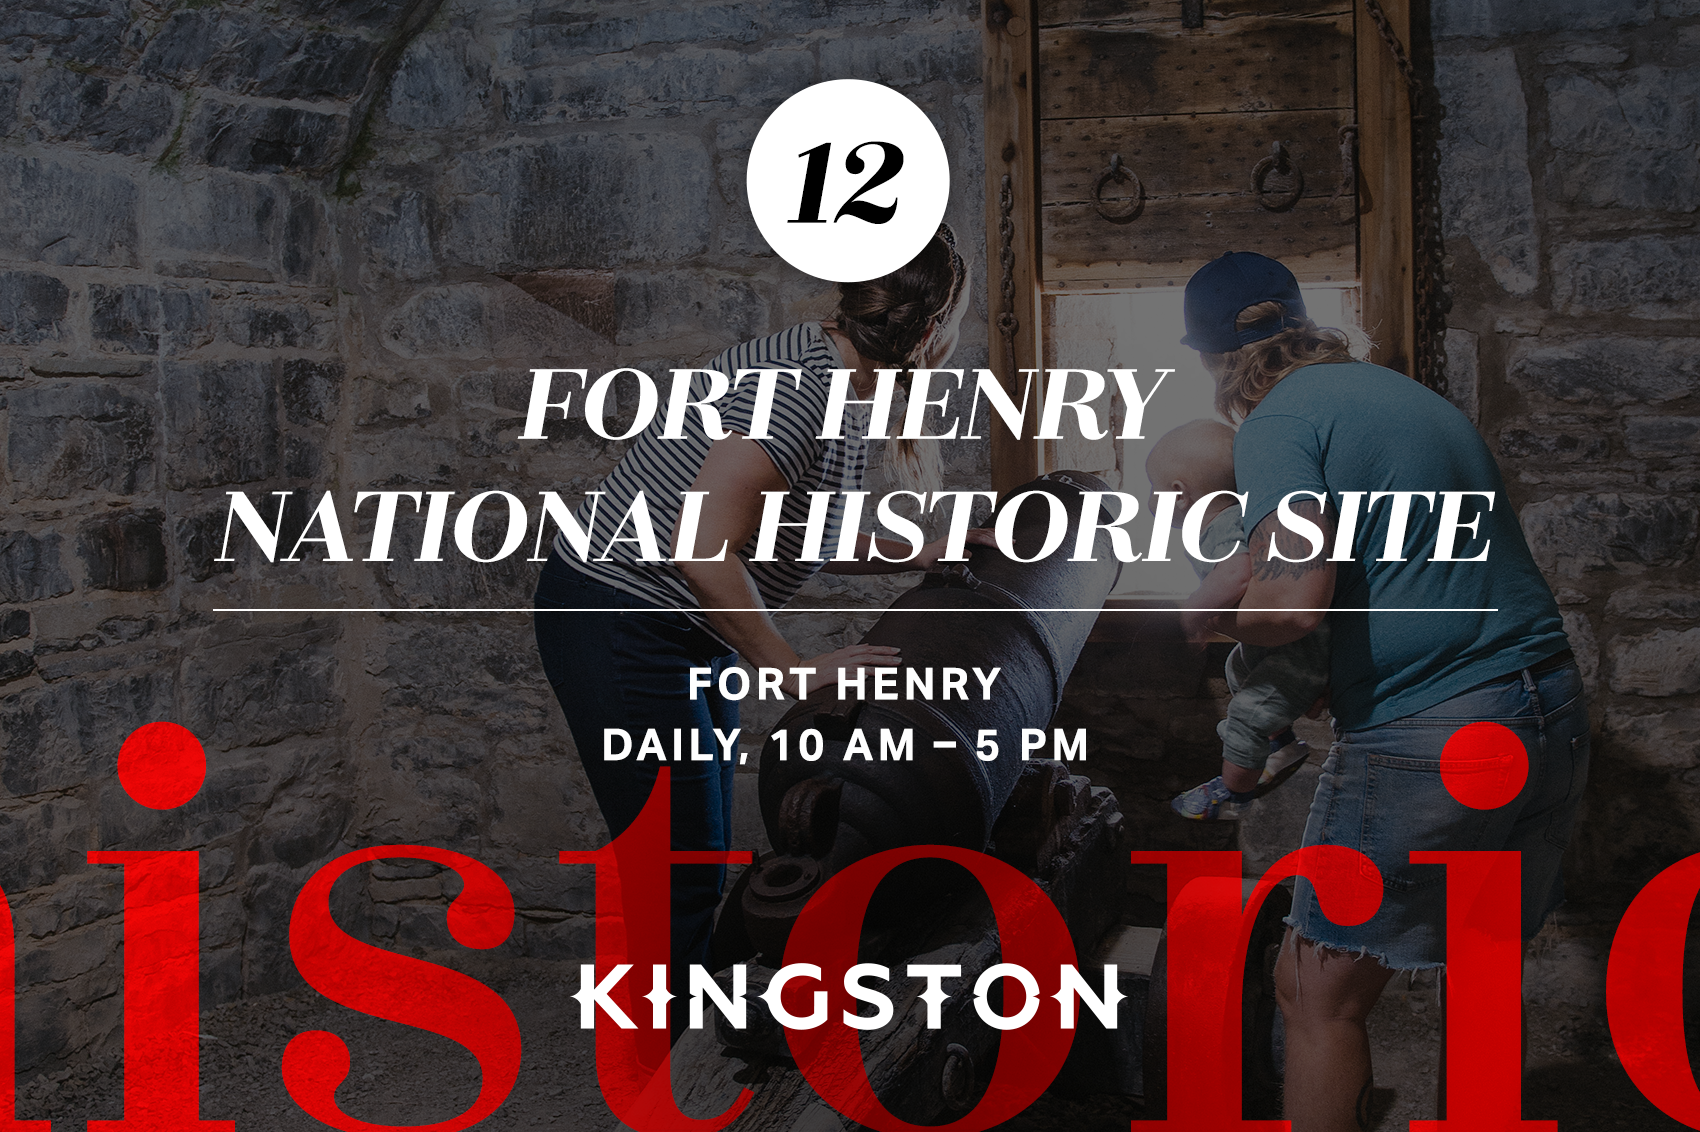 Fort Henry National Historic Site